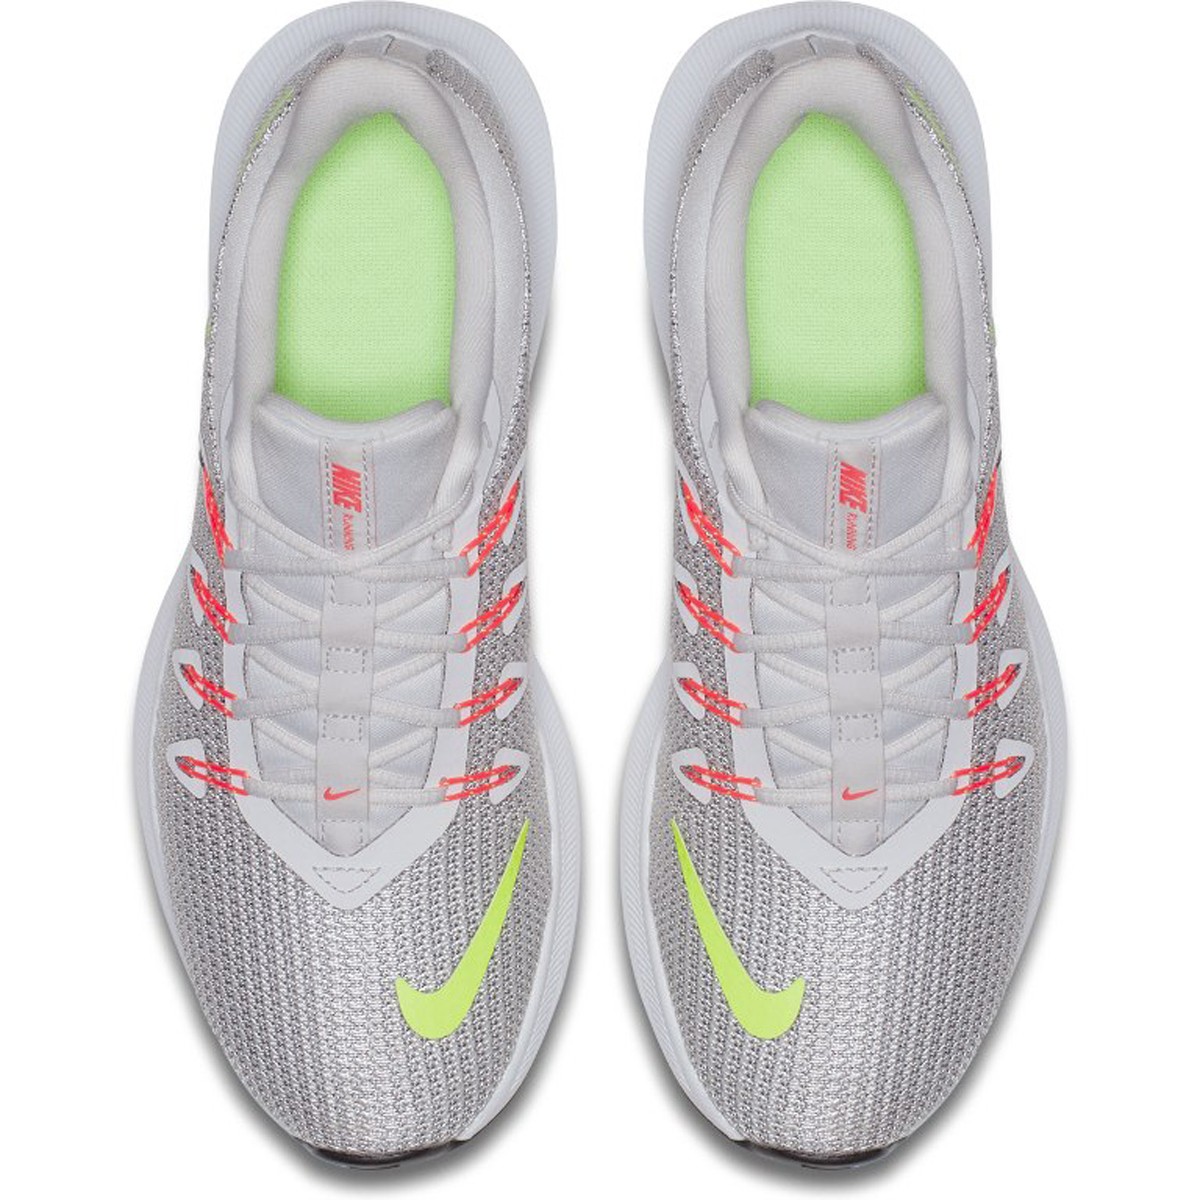 Nike WMNS NIKE QUEST 1.5 